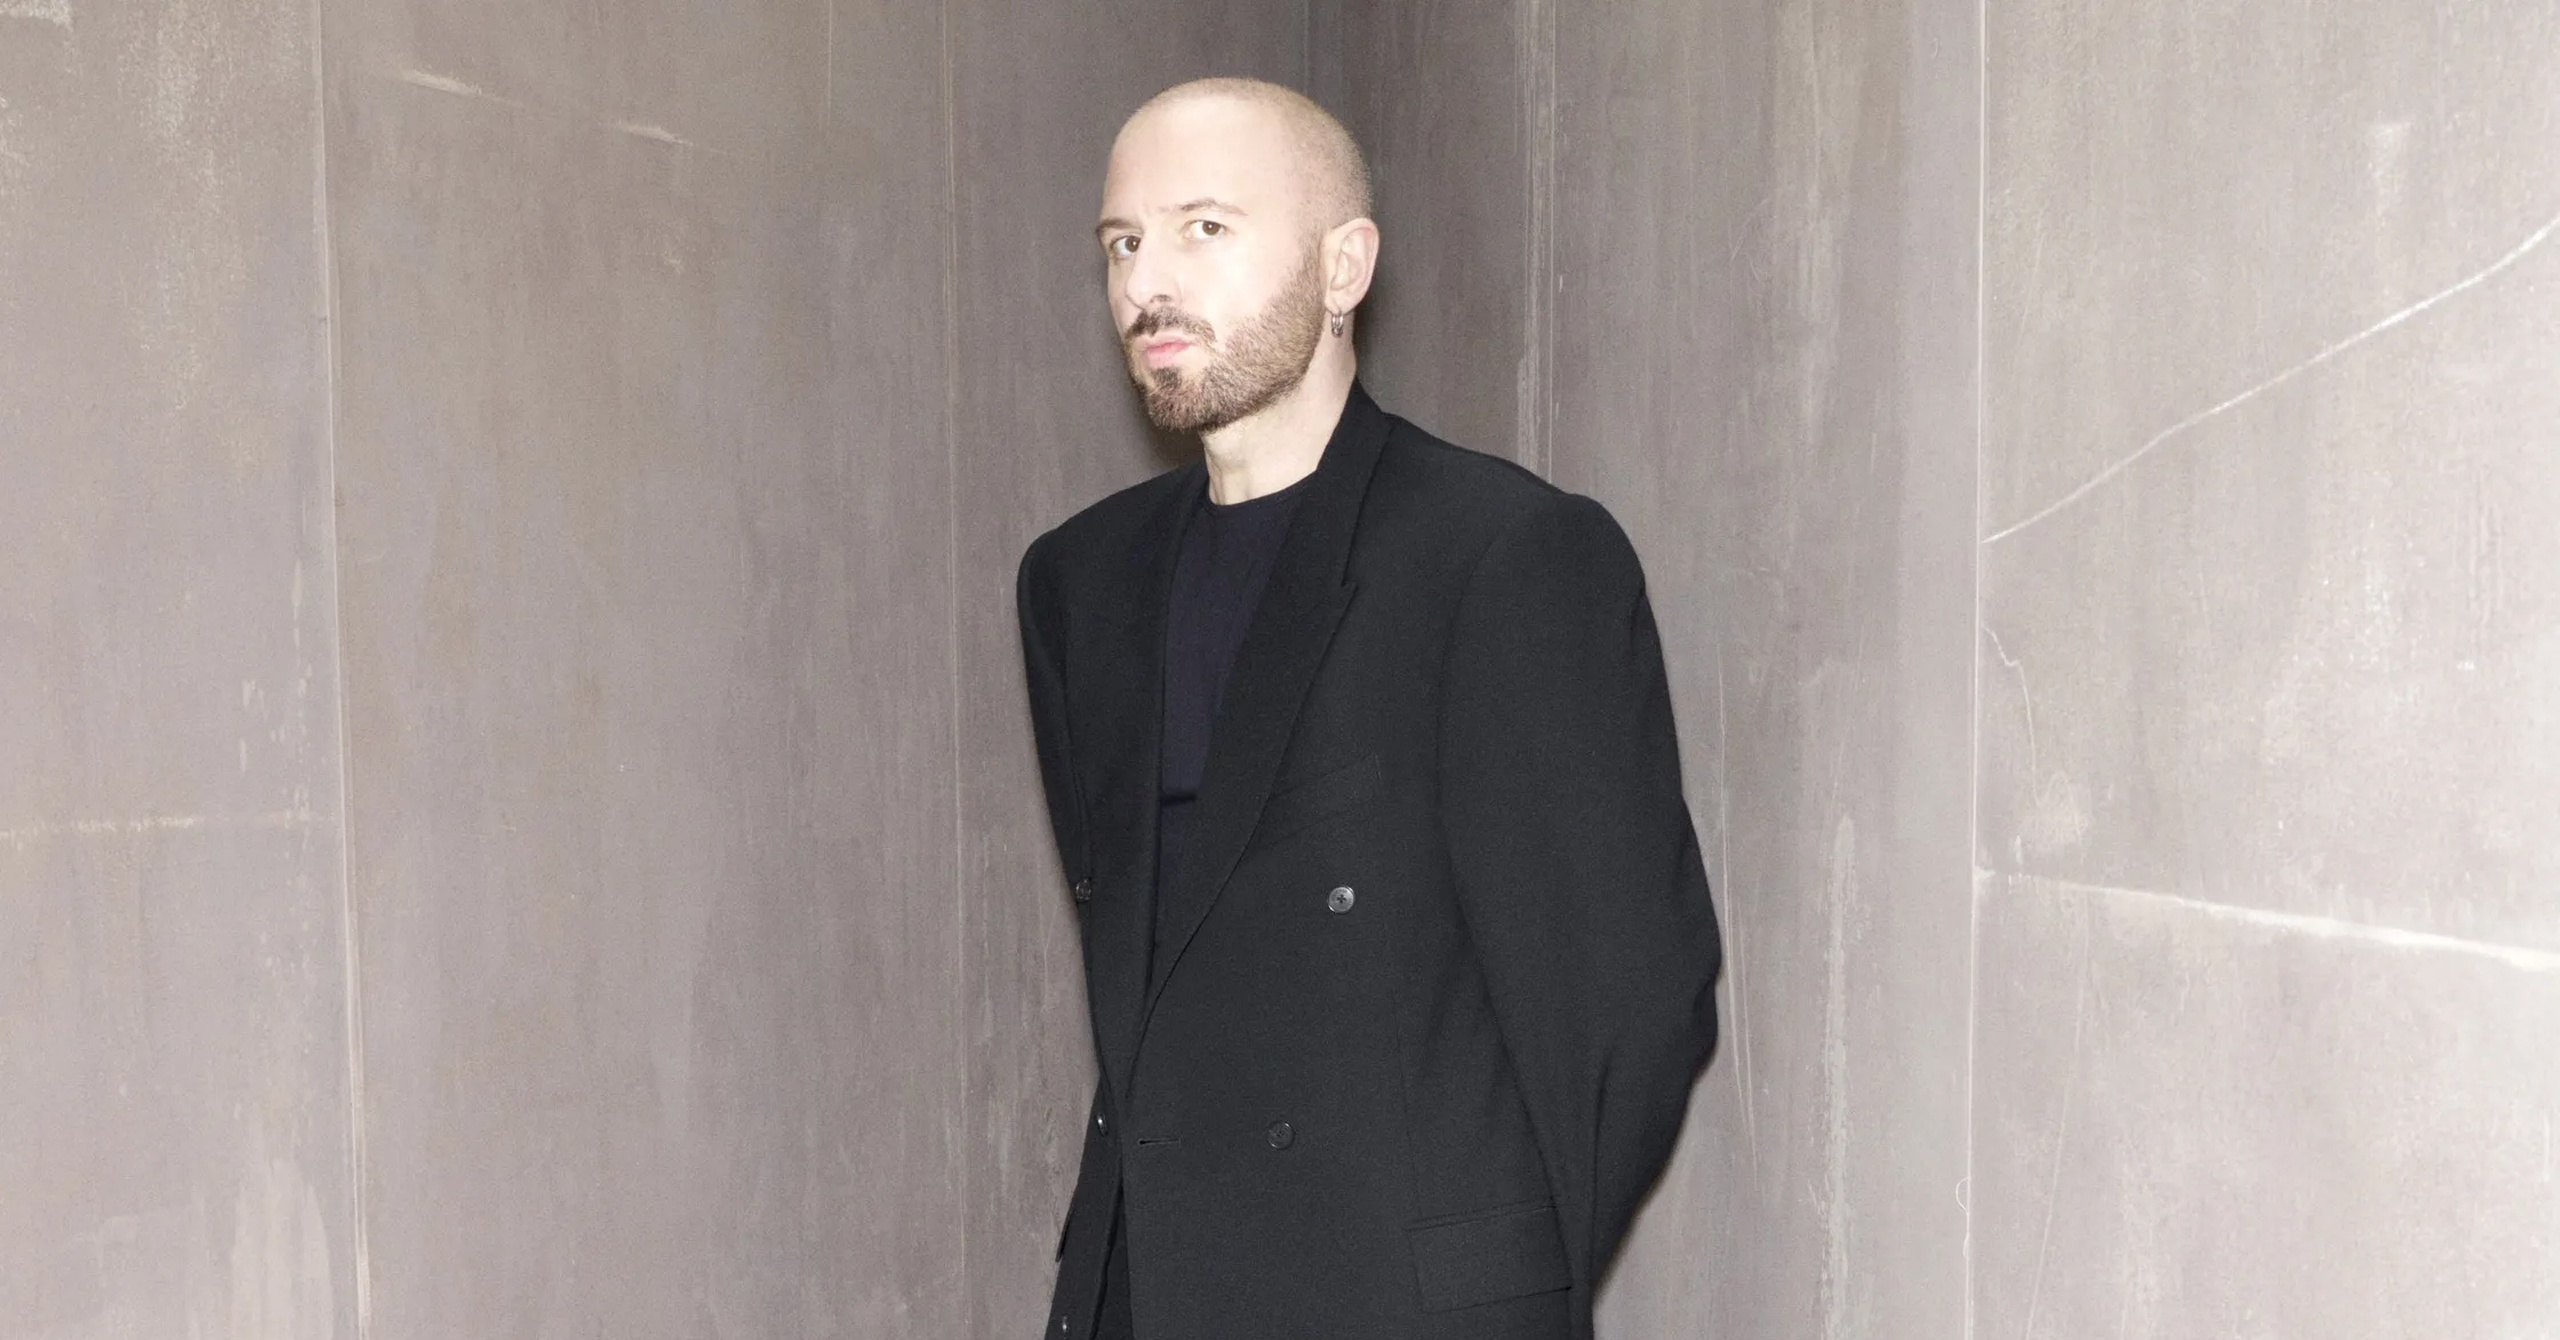 Demna Gvasalia Wants to Be Known by His First Name Only - PAPER